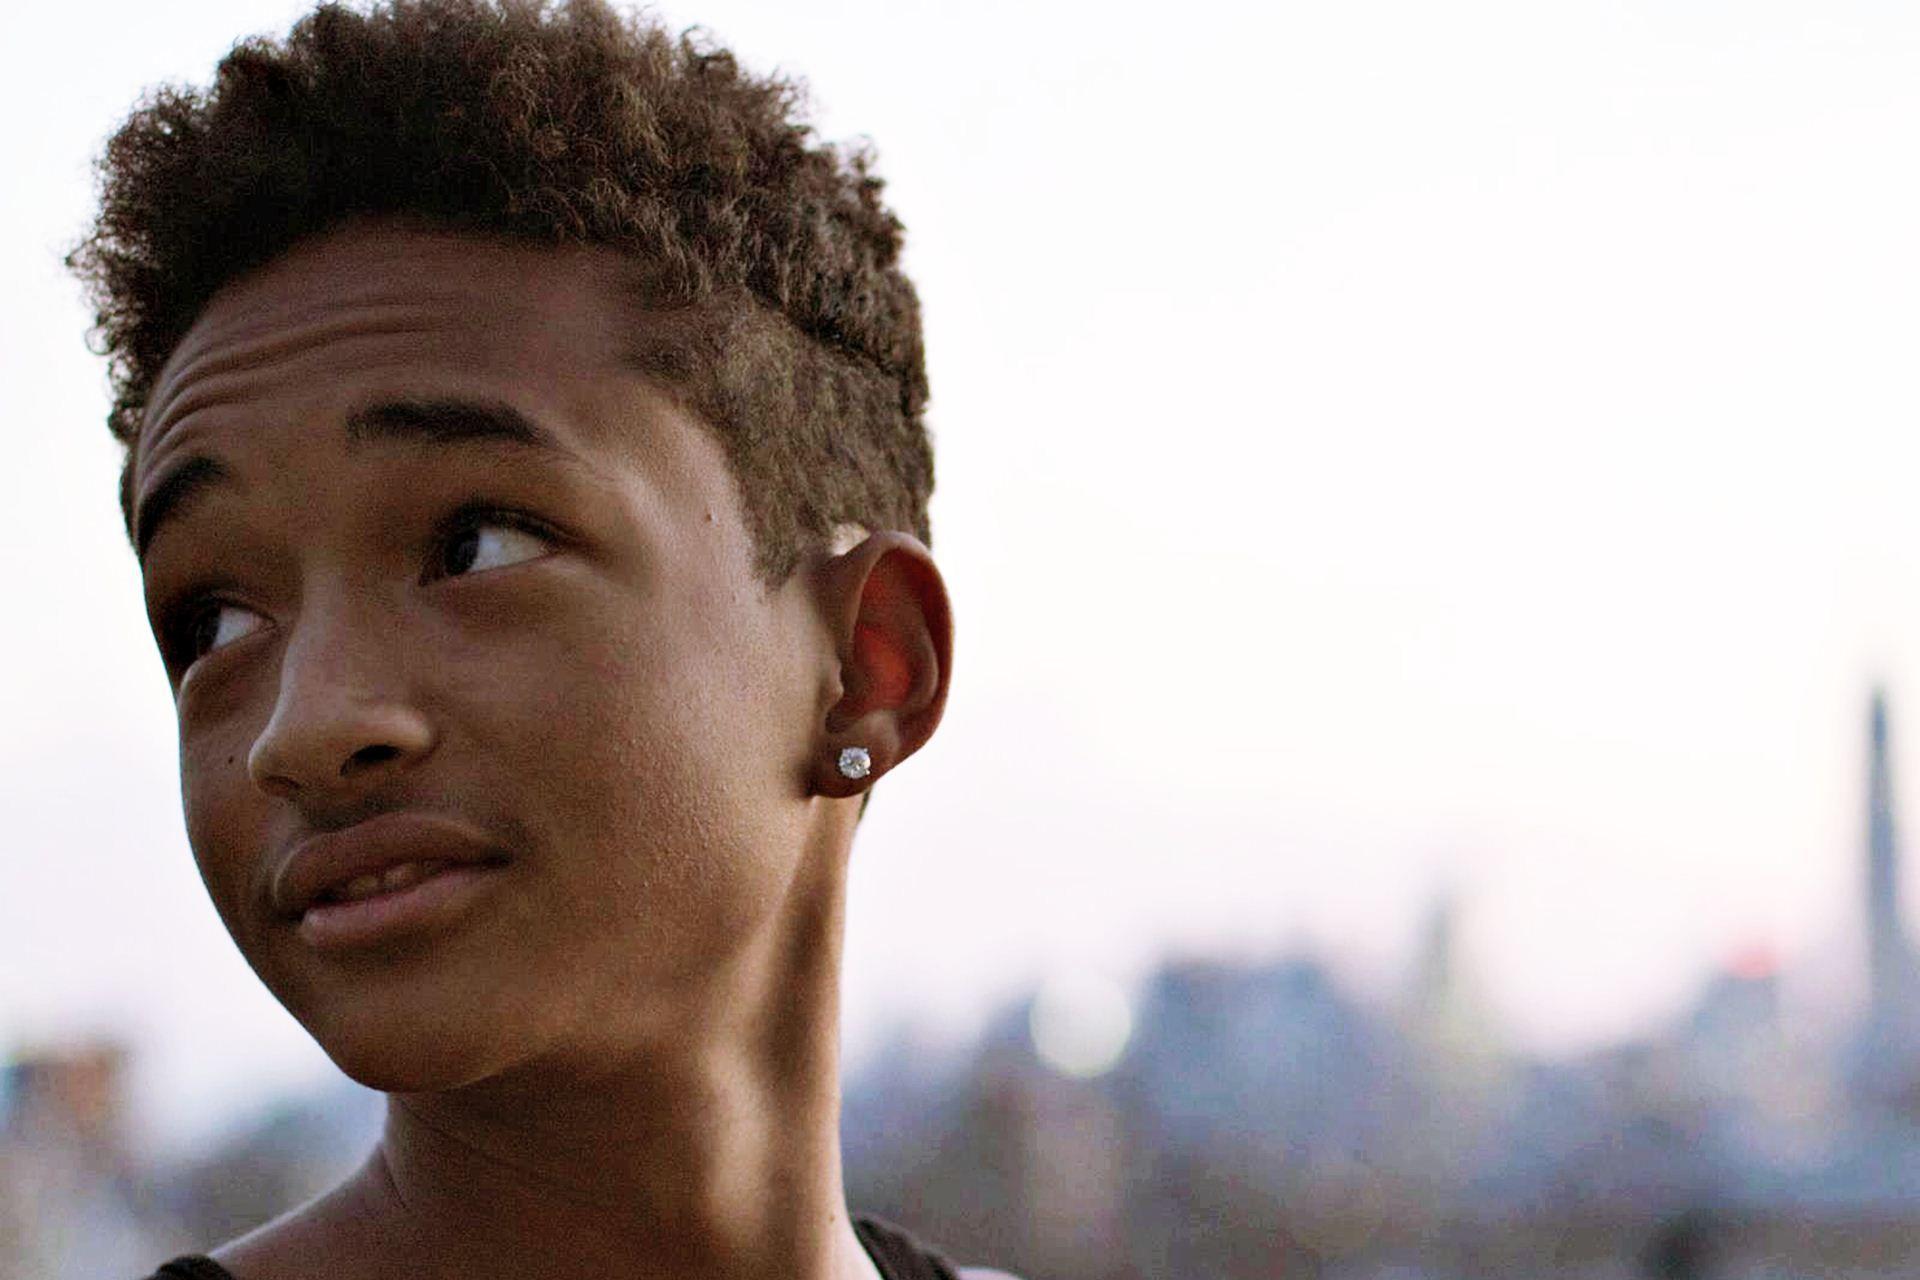 Jaden Smith Wallpapers Image Photos Pictures Backgrounds 2202 × 1345.